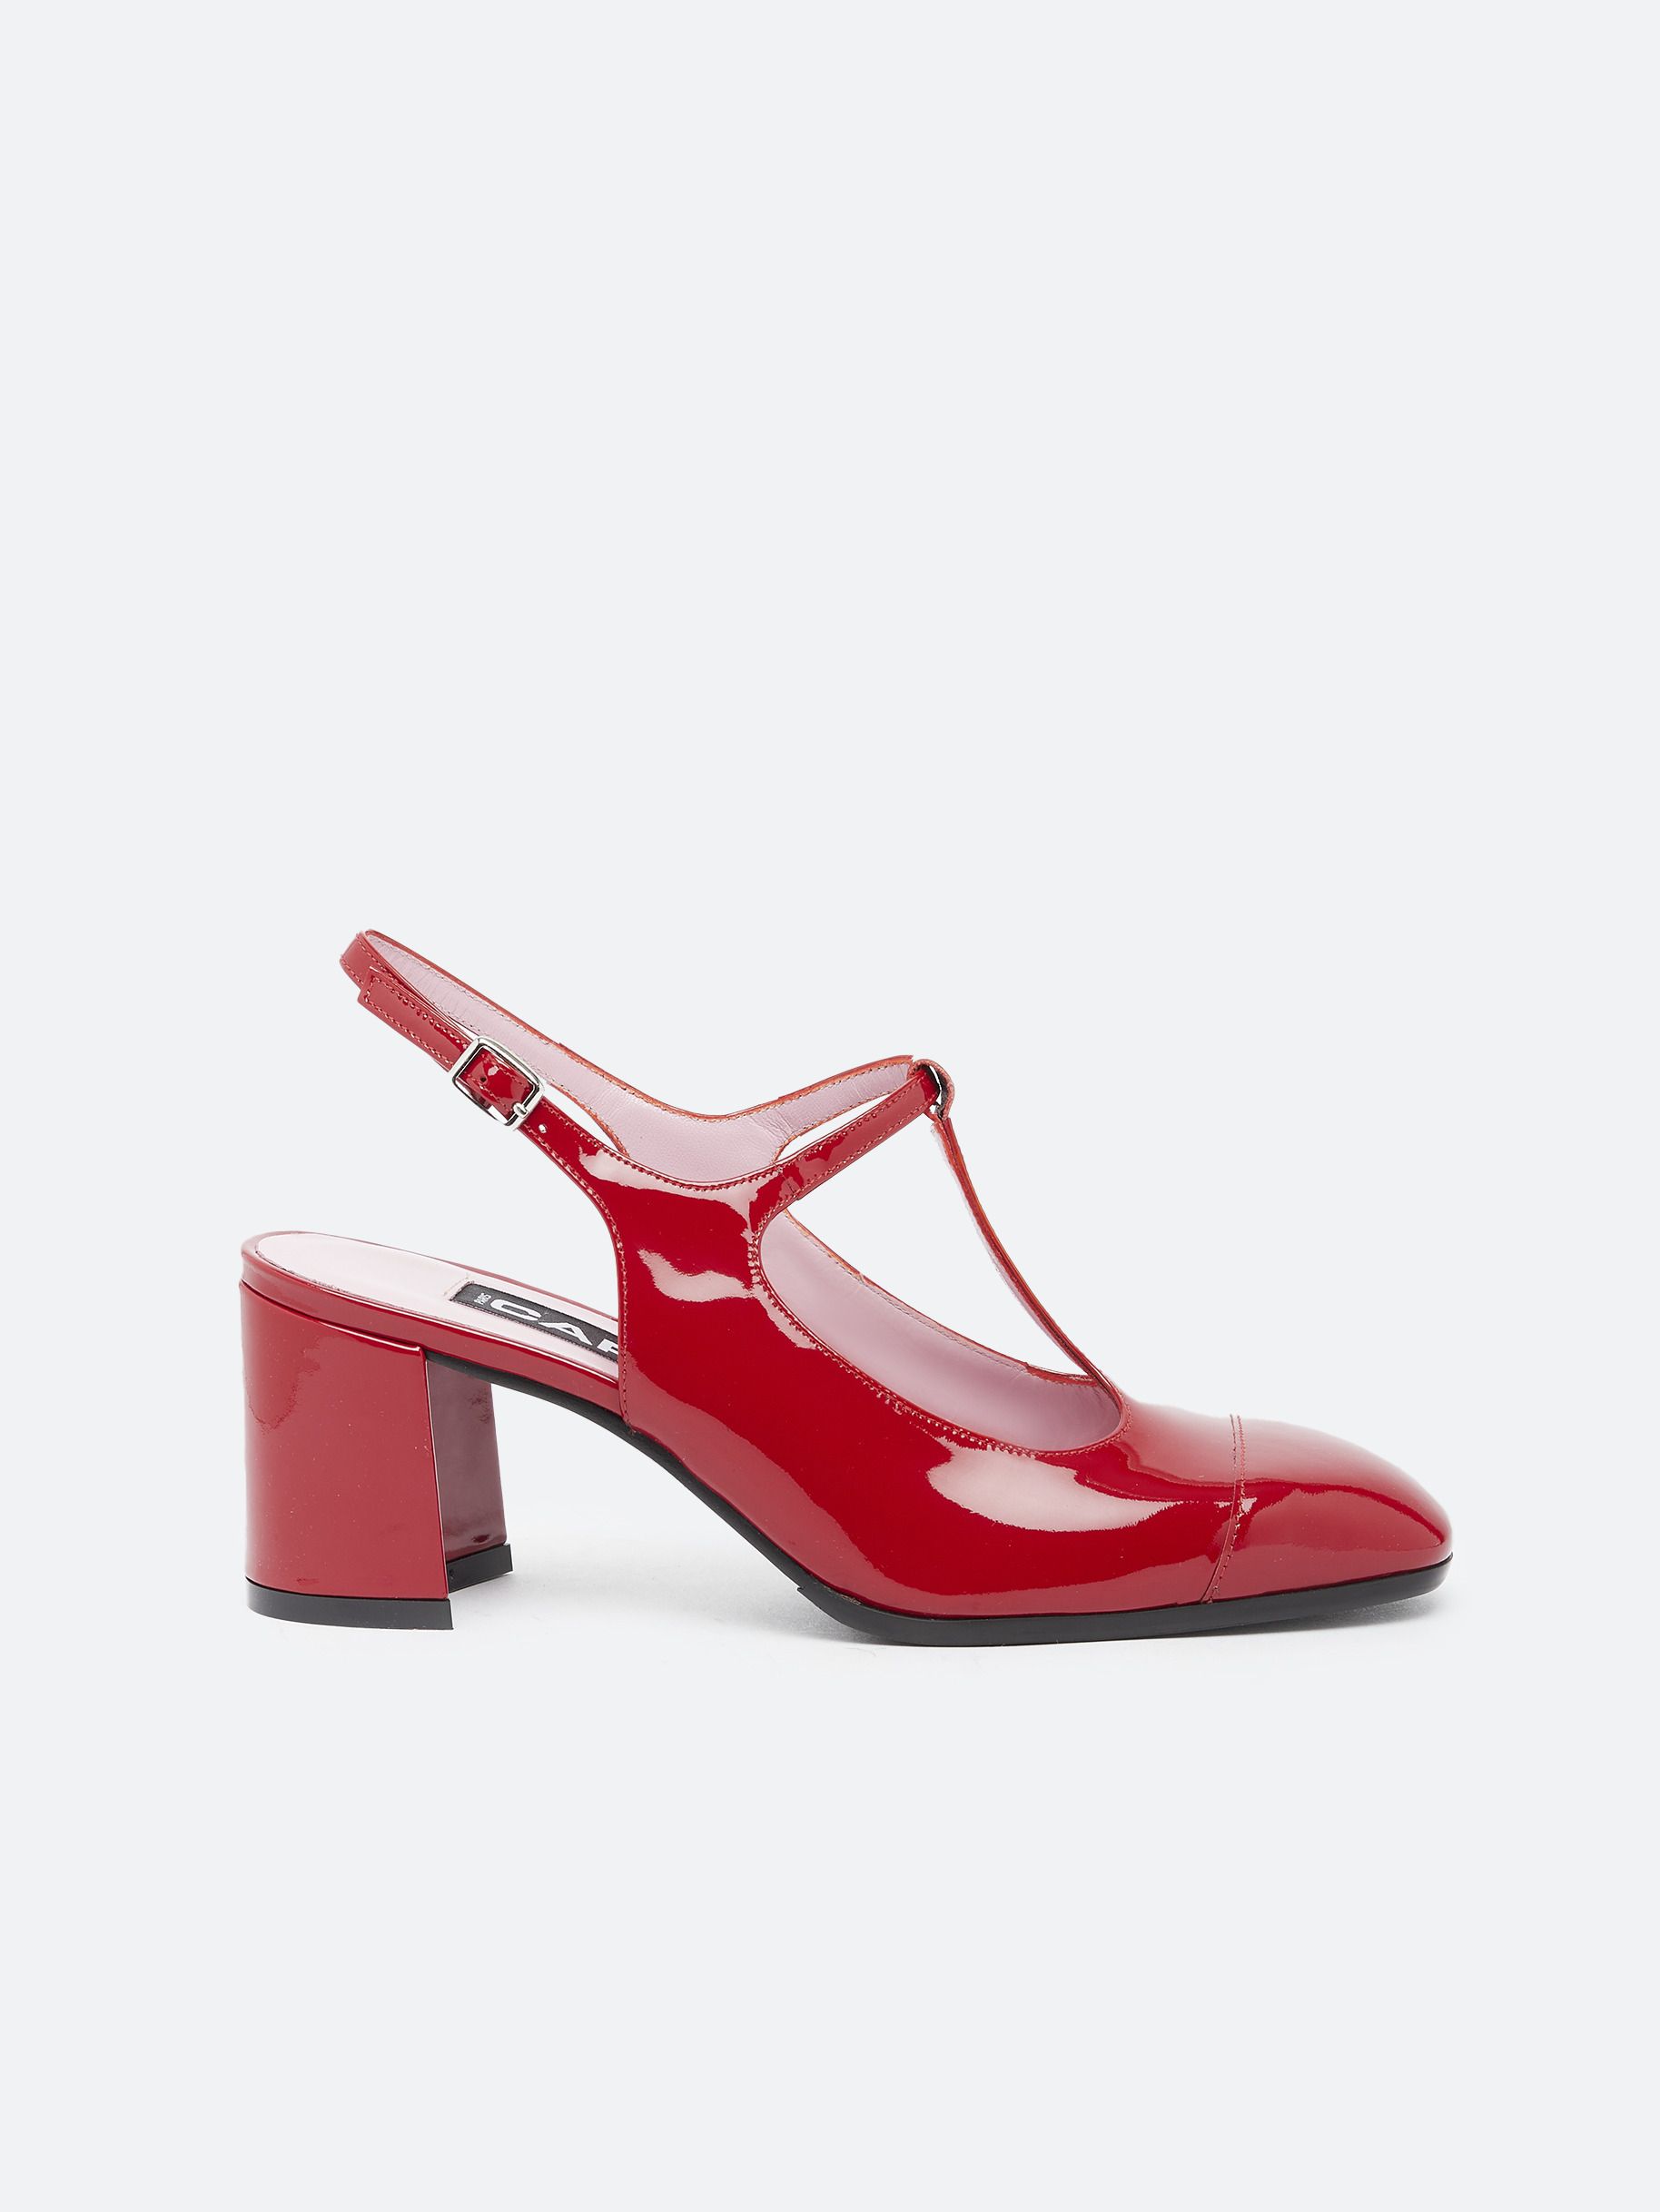 KINA red patent leather mary janes | Carel Paris Shoes